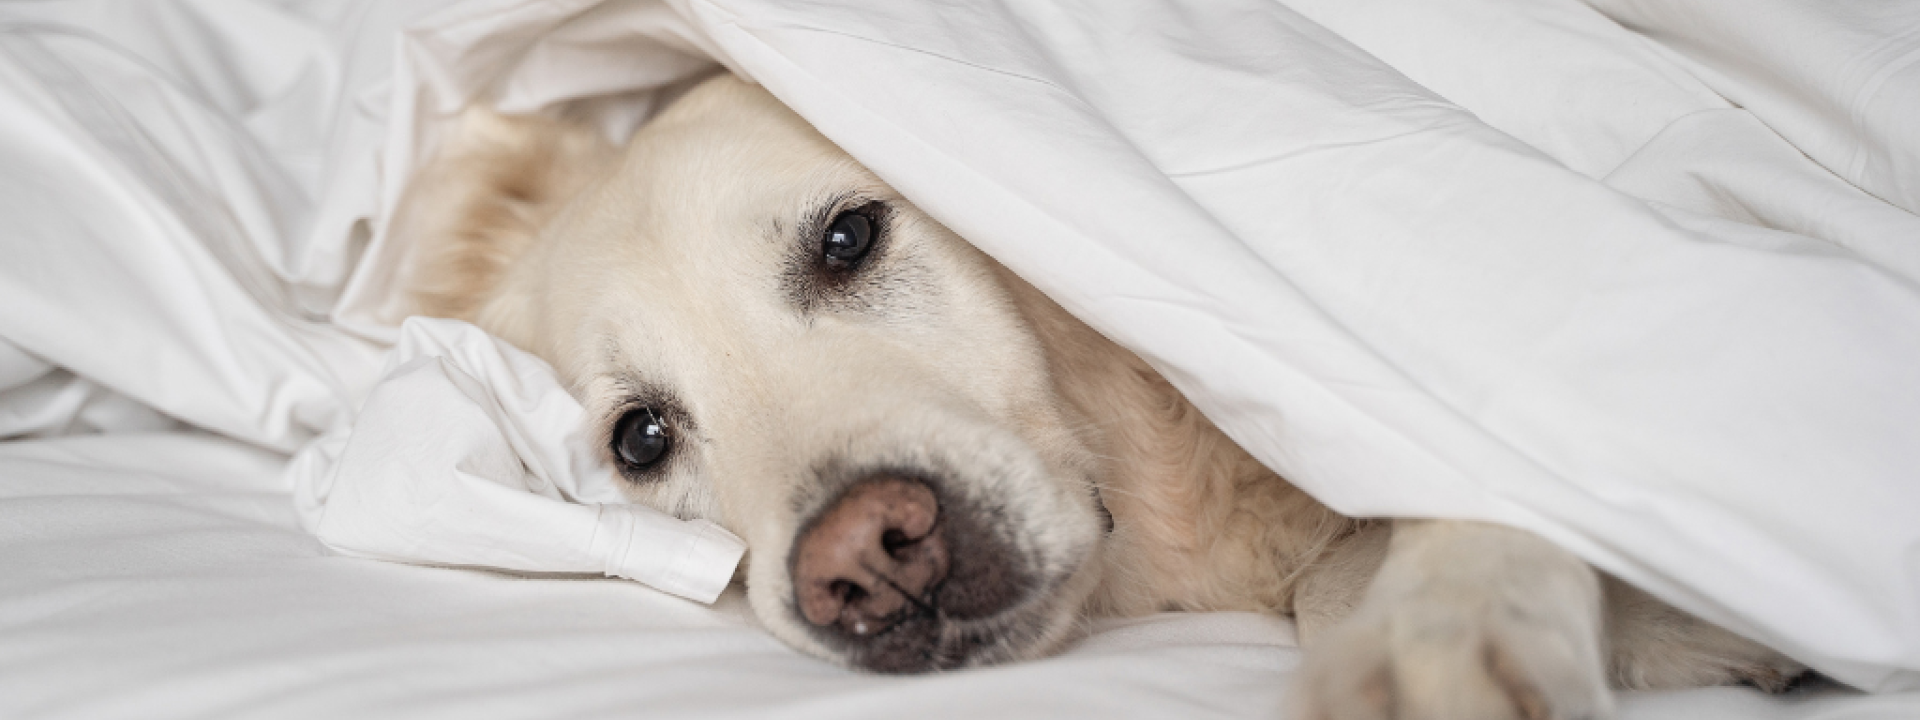 Сlose-up ill dog lying under white blanket in bed